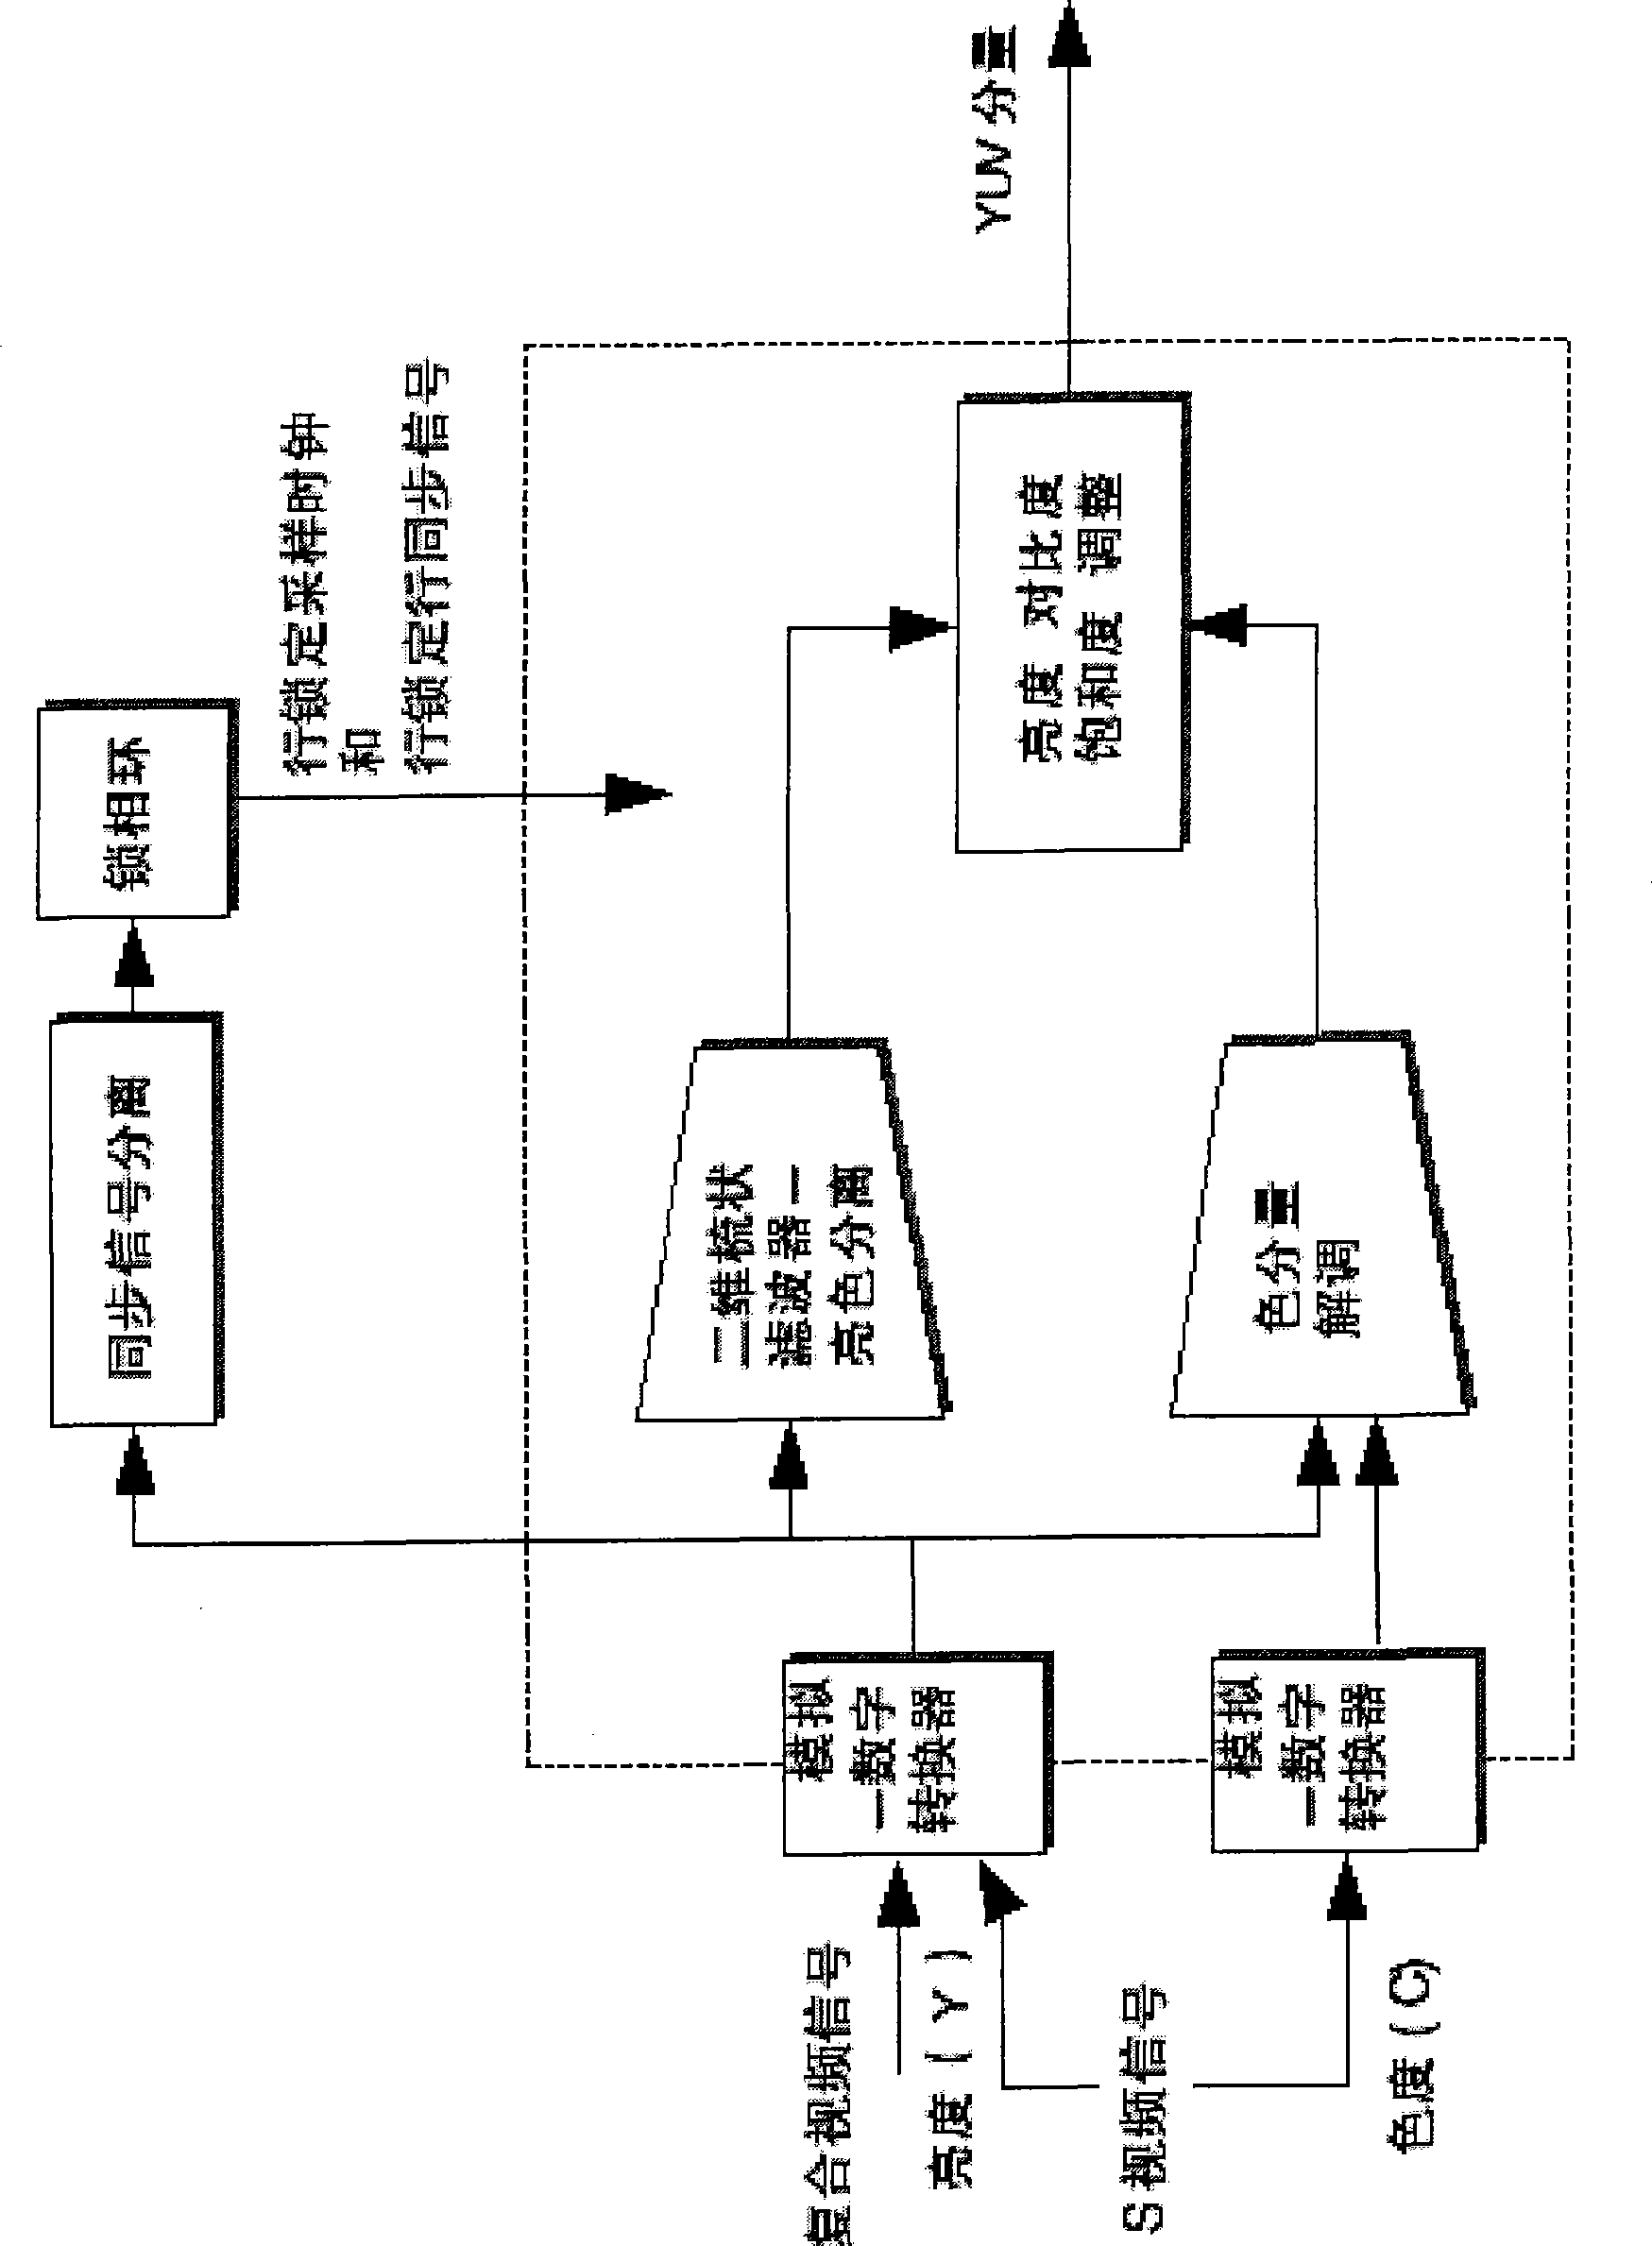 Digital demodulation method for non-synchronous composite video signal and S video signal